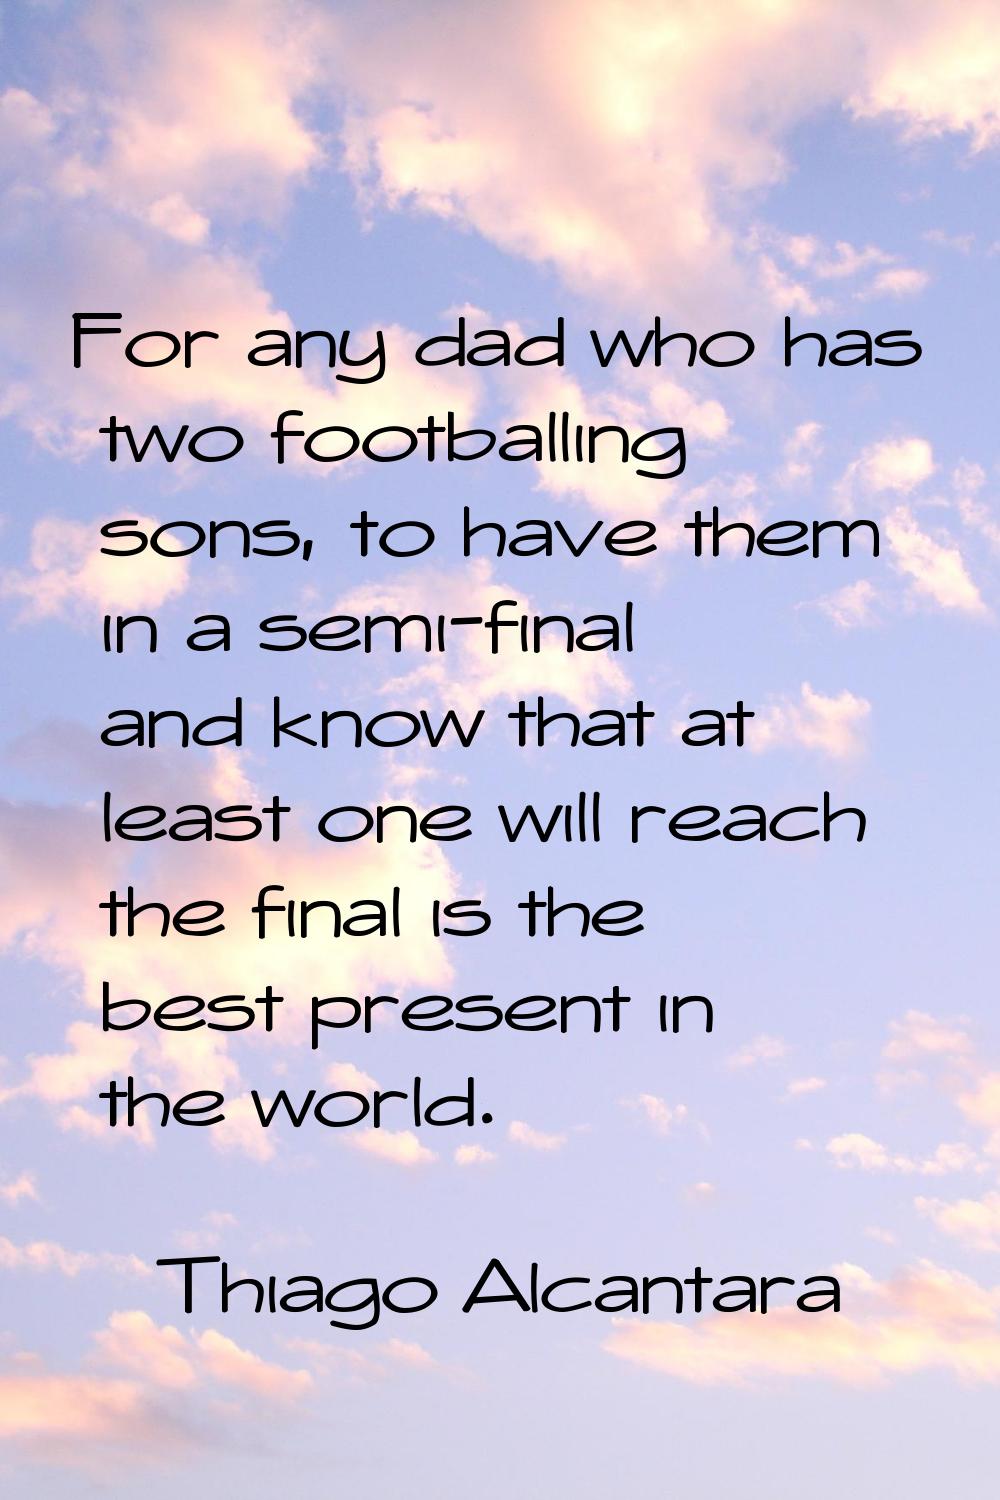 For any dad who has two footballing sons, to have them in a semi-final and know that at least one w